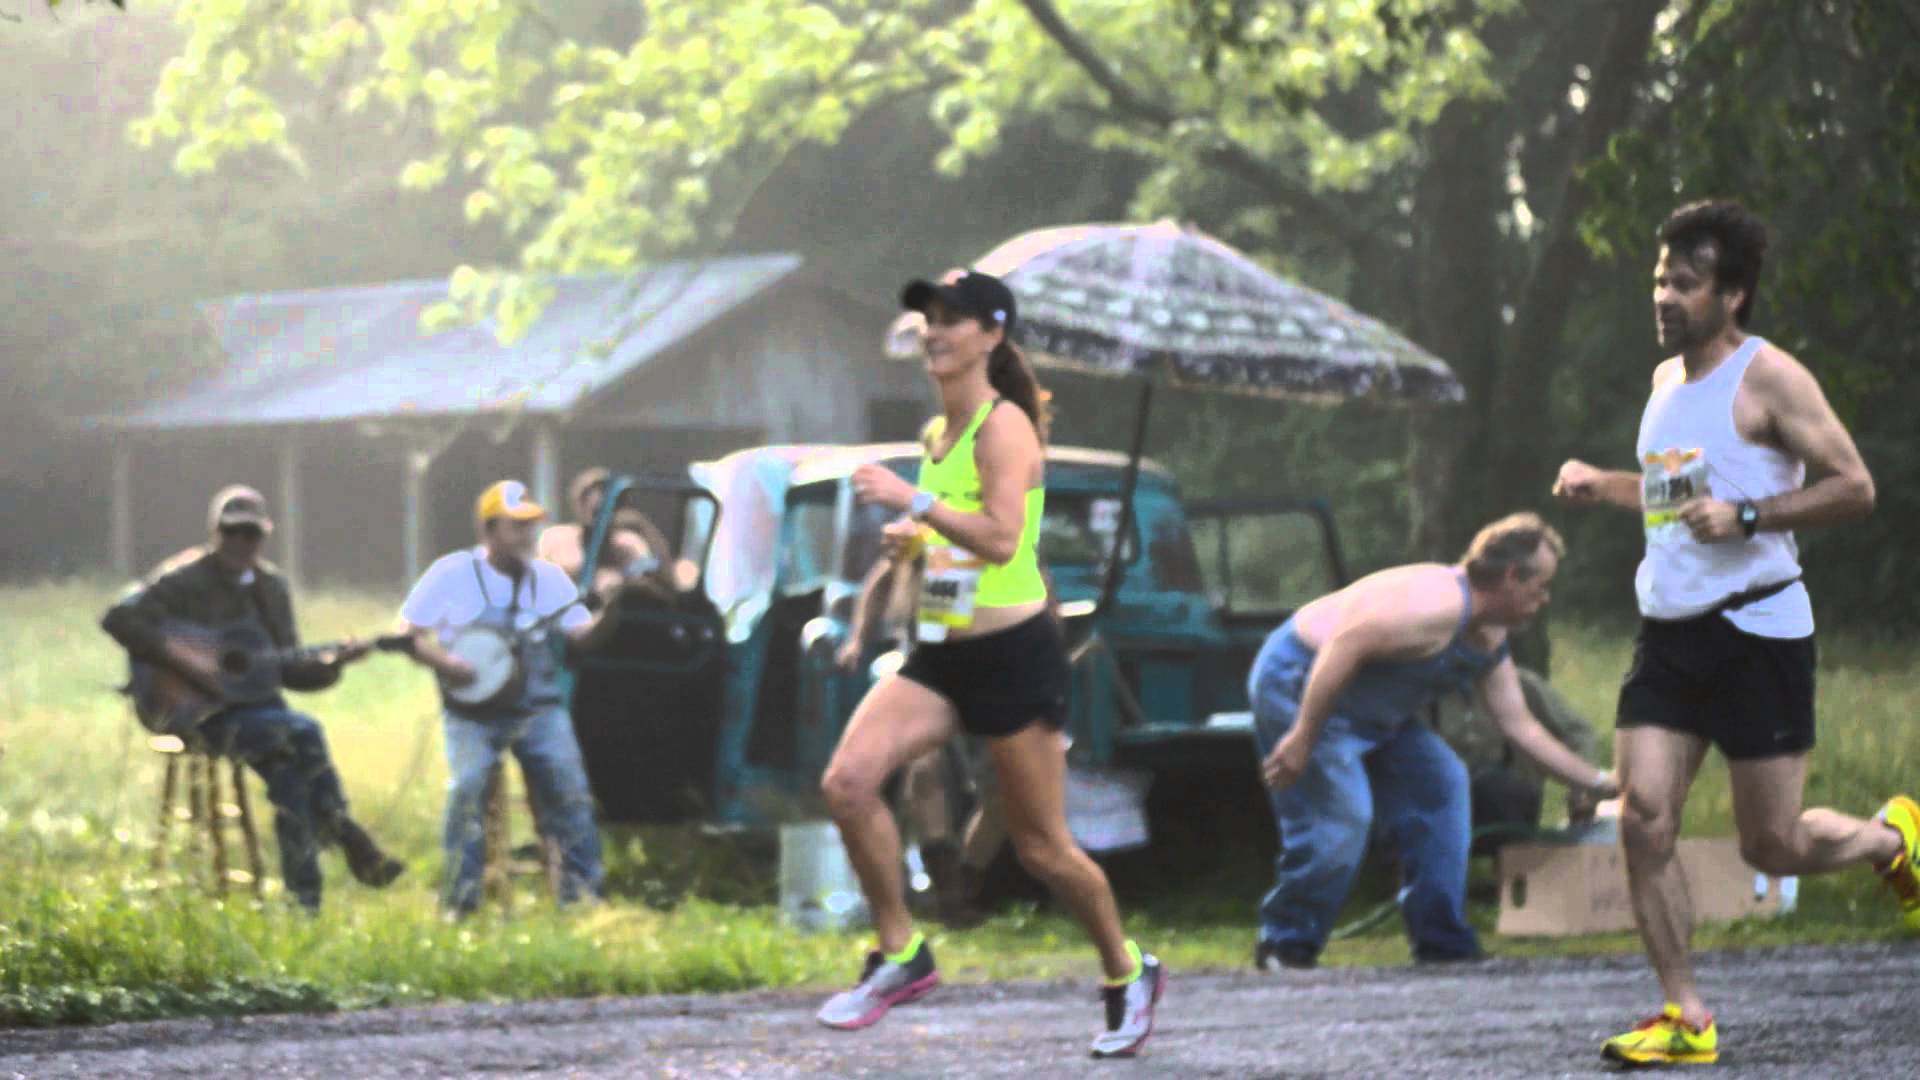 ‘What Are Ya’ll Running From?’—Tennessee Half Marathon Hecklers Go Viral